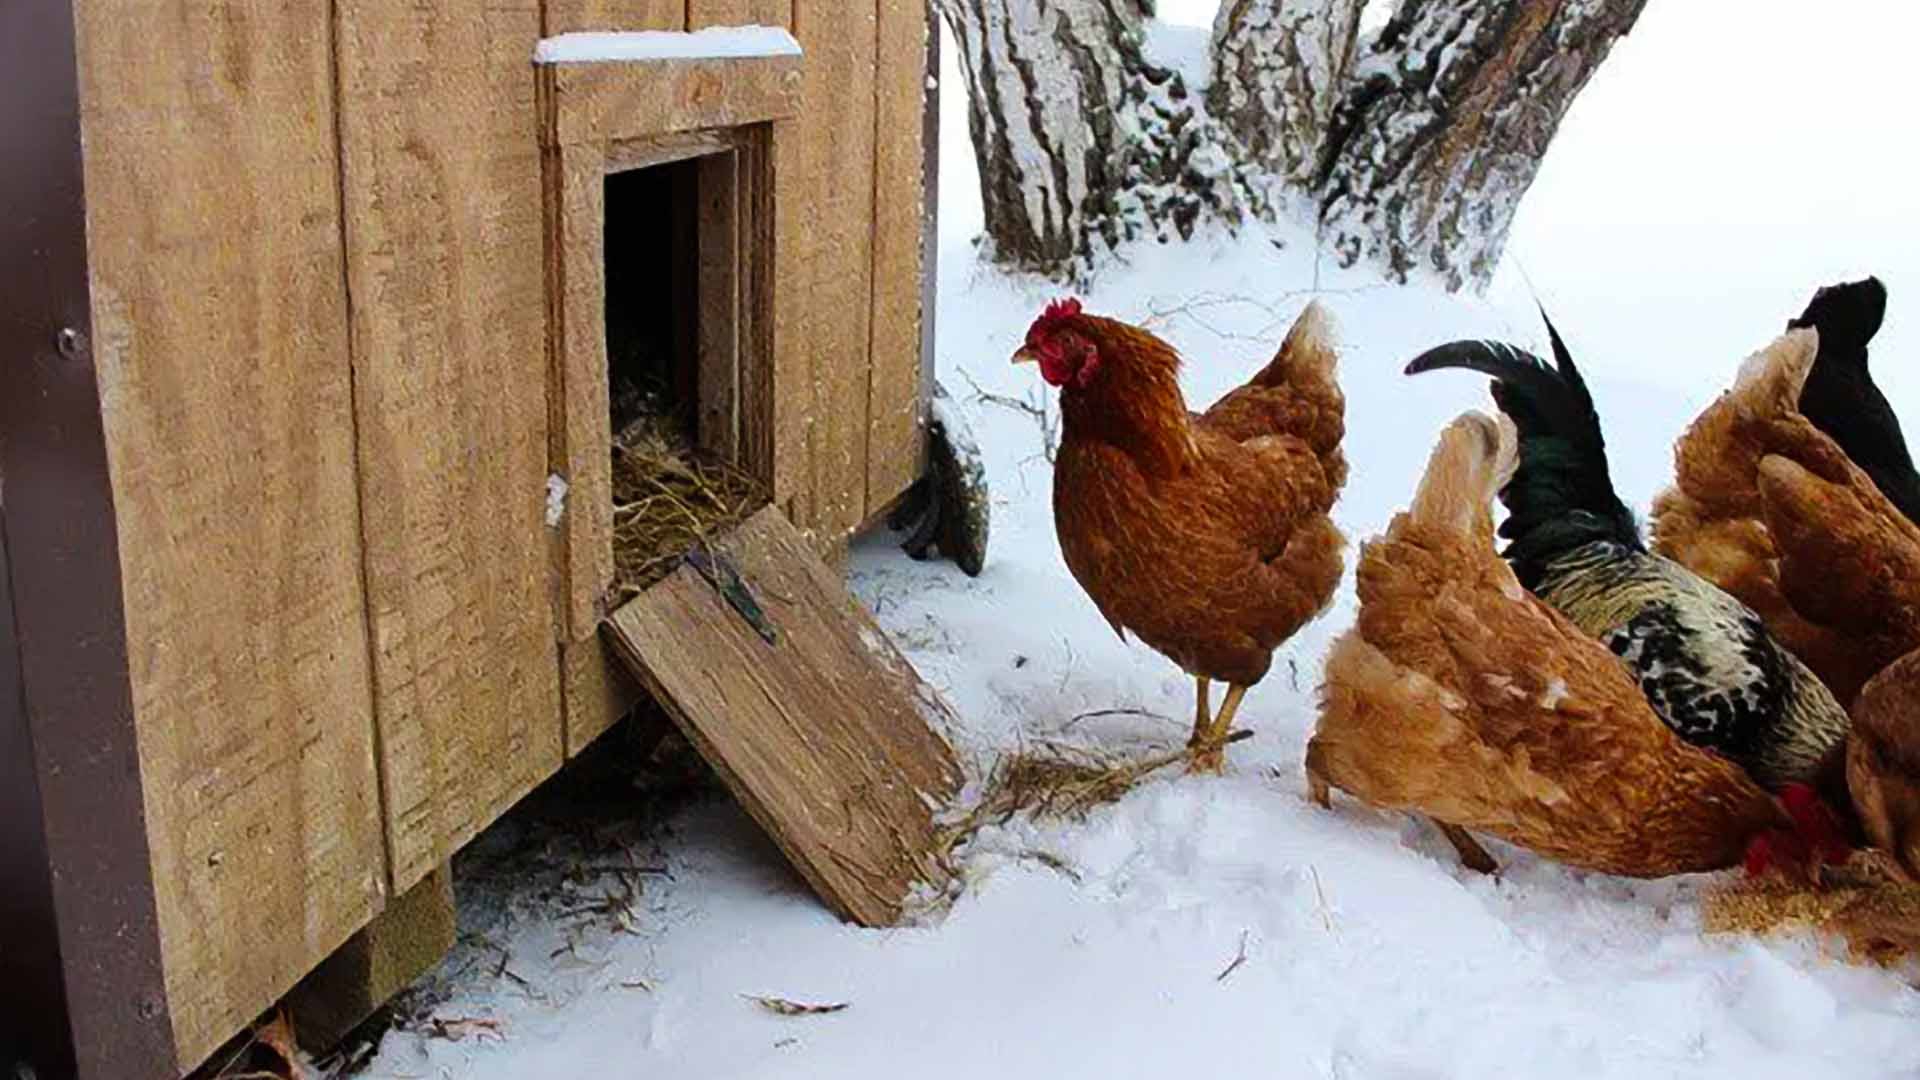 Sun Rise Sheds | 10 Ways To Save Your Flock by Winterizing Their Chicken Coop